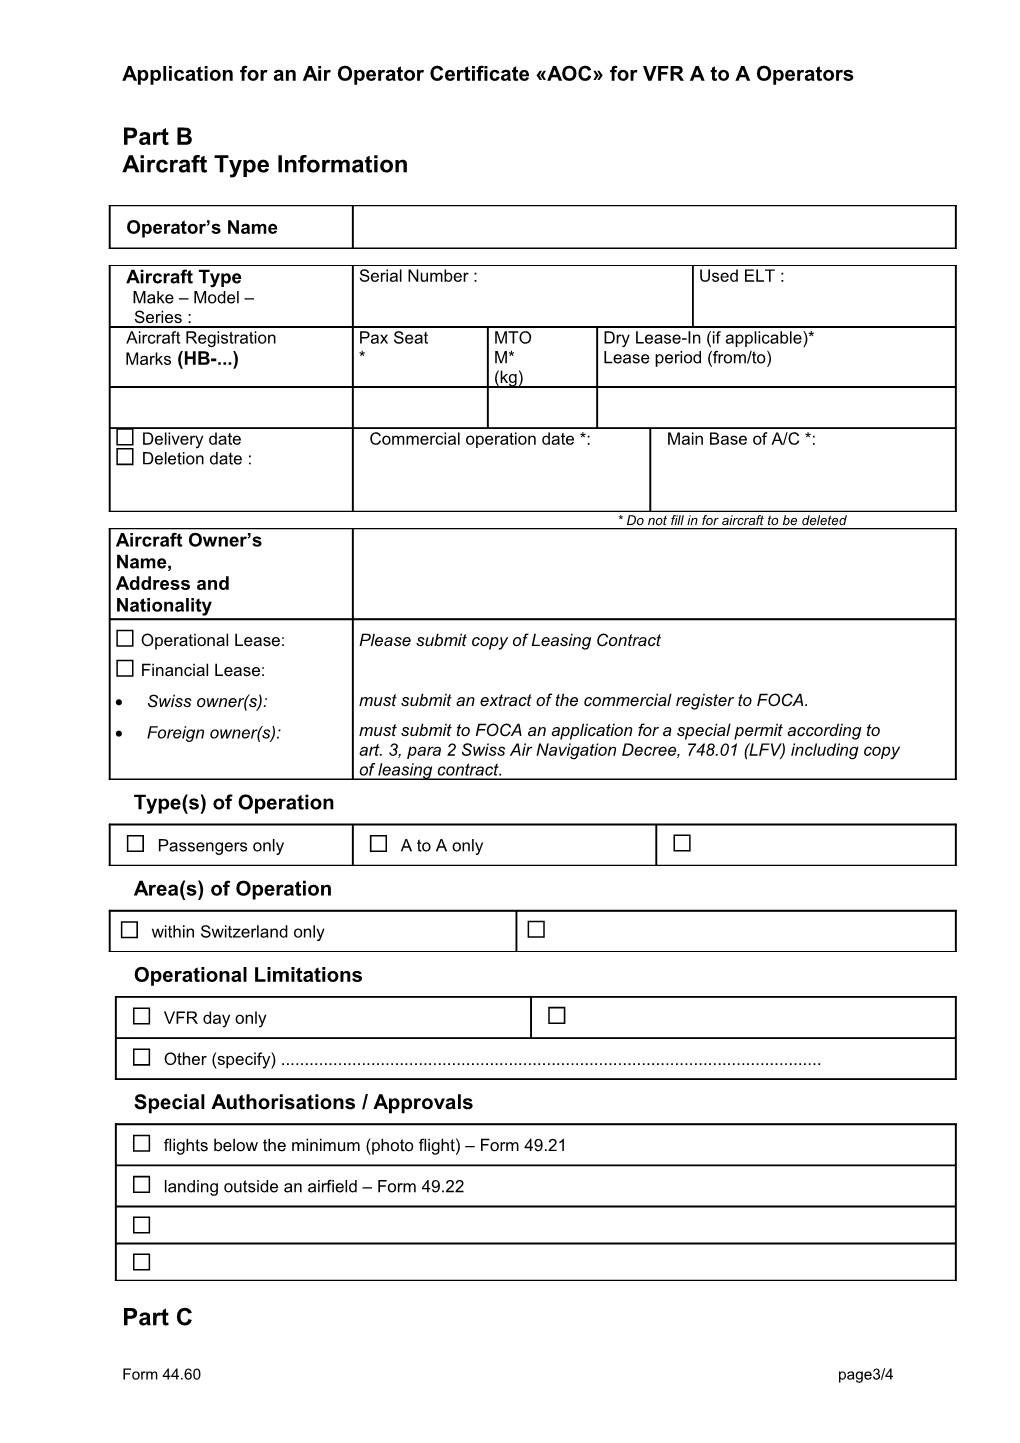 Application for an Air Operator Certificate AOC for VFR a to a Operators